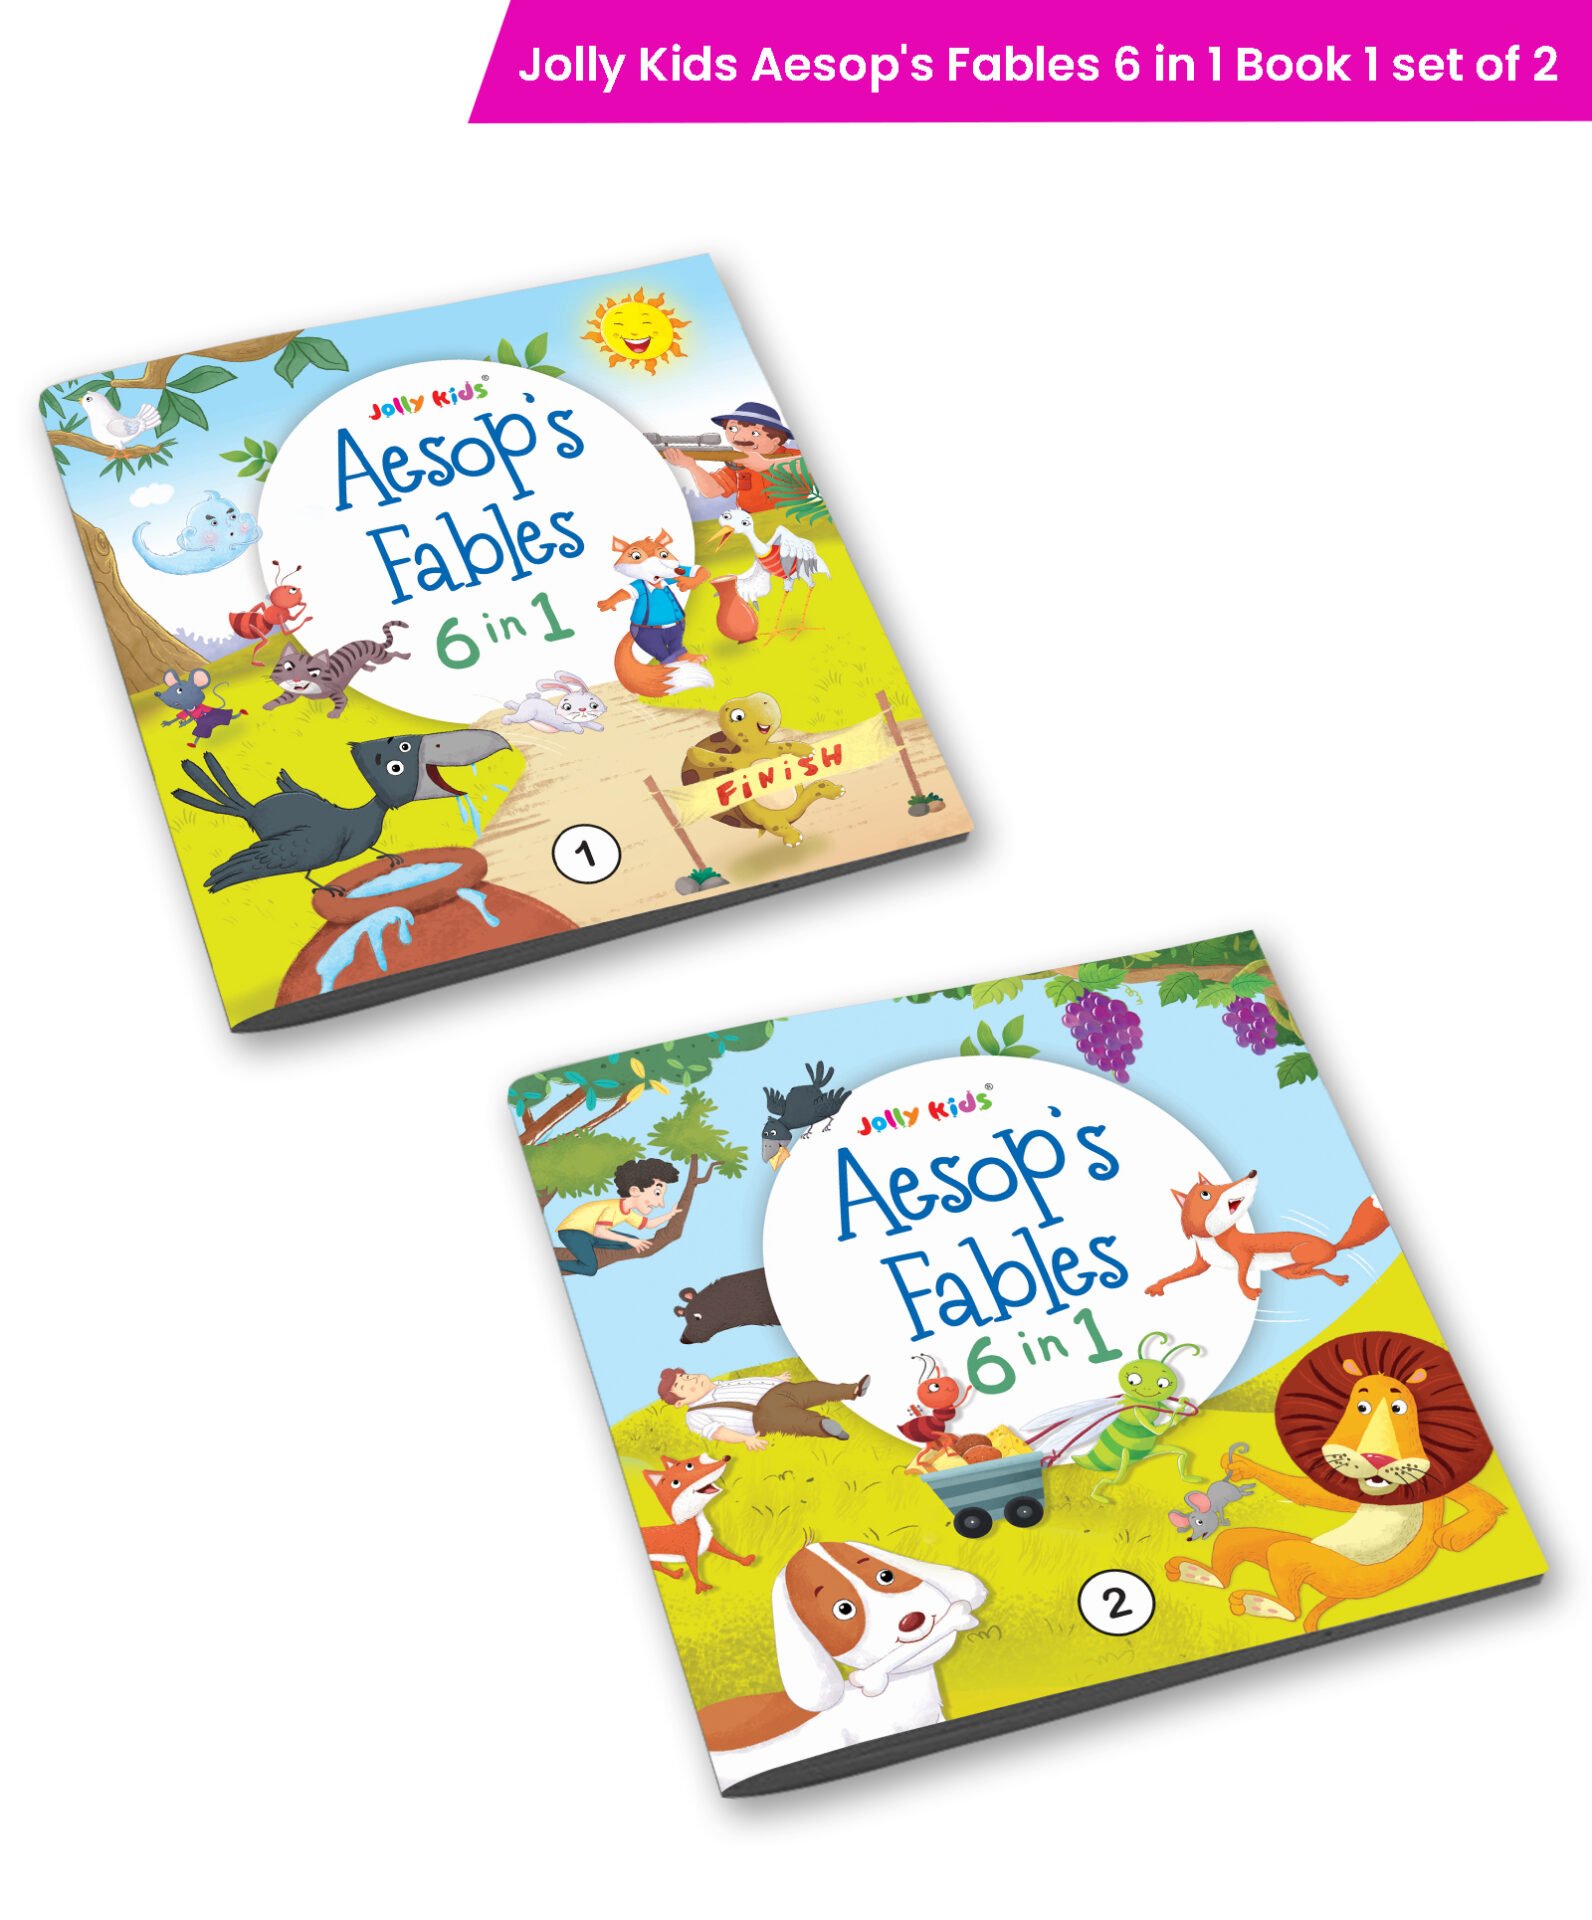 Jolly Kids Aesops Fables 6 in 1 Books Set of 2 (1)